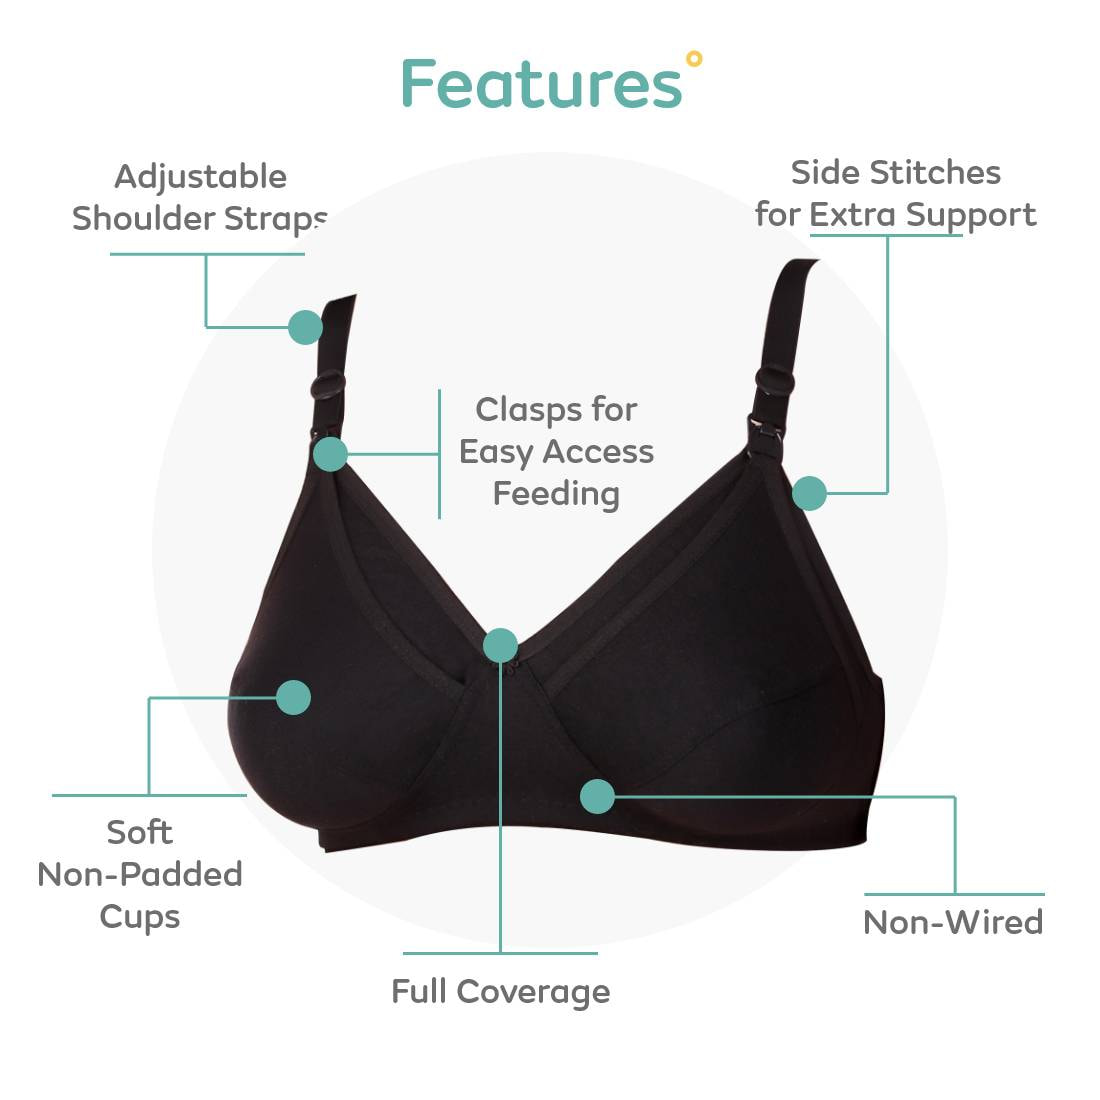 Maternity/Nursing Bras Non-Wired, Non-Padded - Pack of 3 with free Bra Extender (Classic Black, Classic White, Magnolia Cream) 38 C